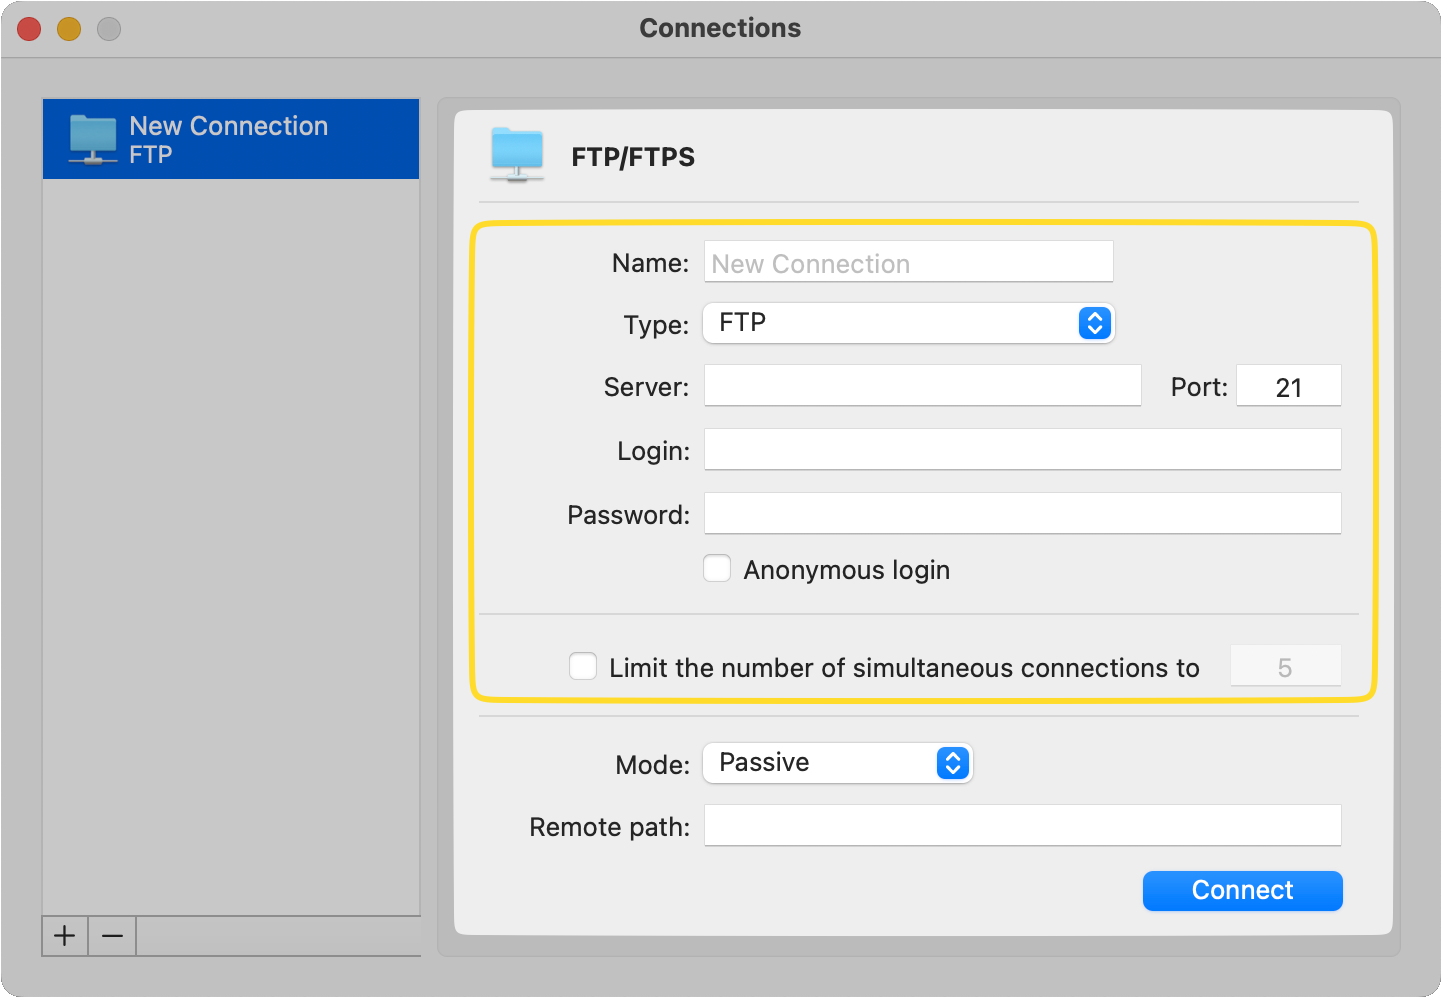 The FTP/FTPS Connection's pop-up window